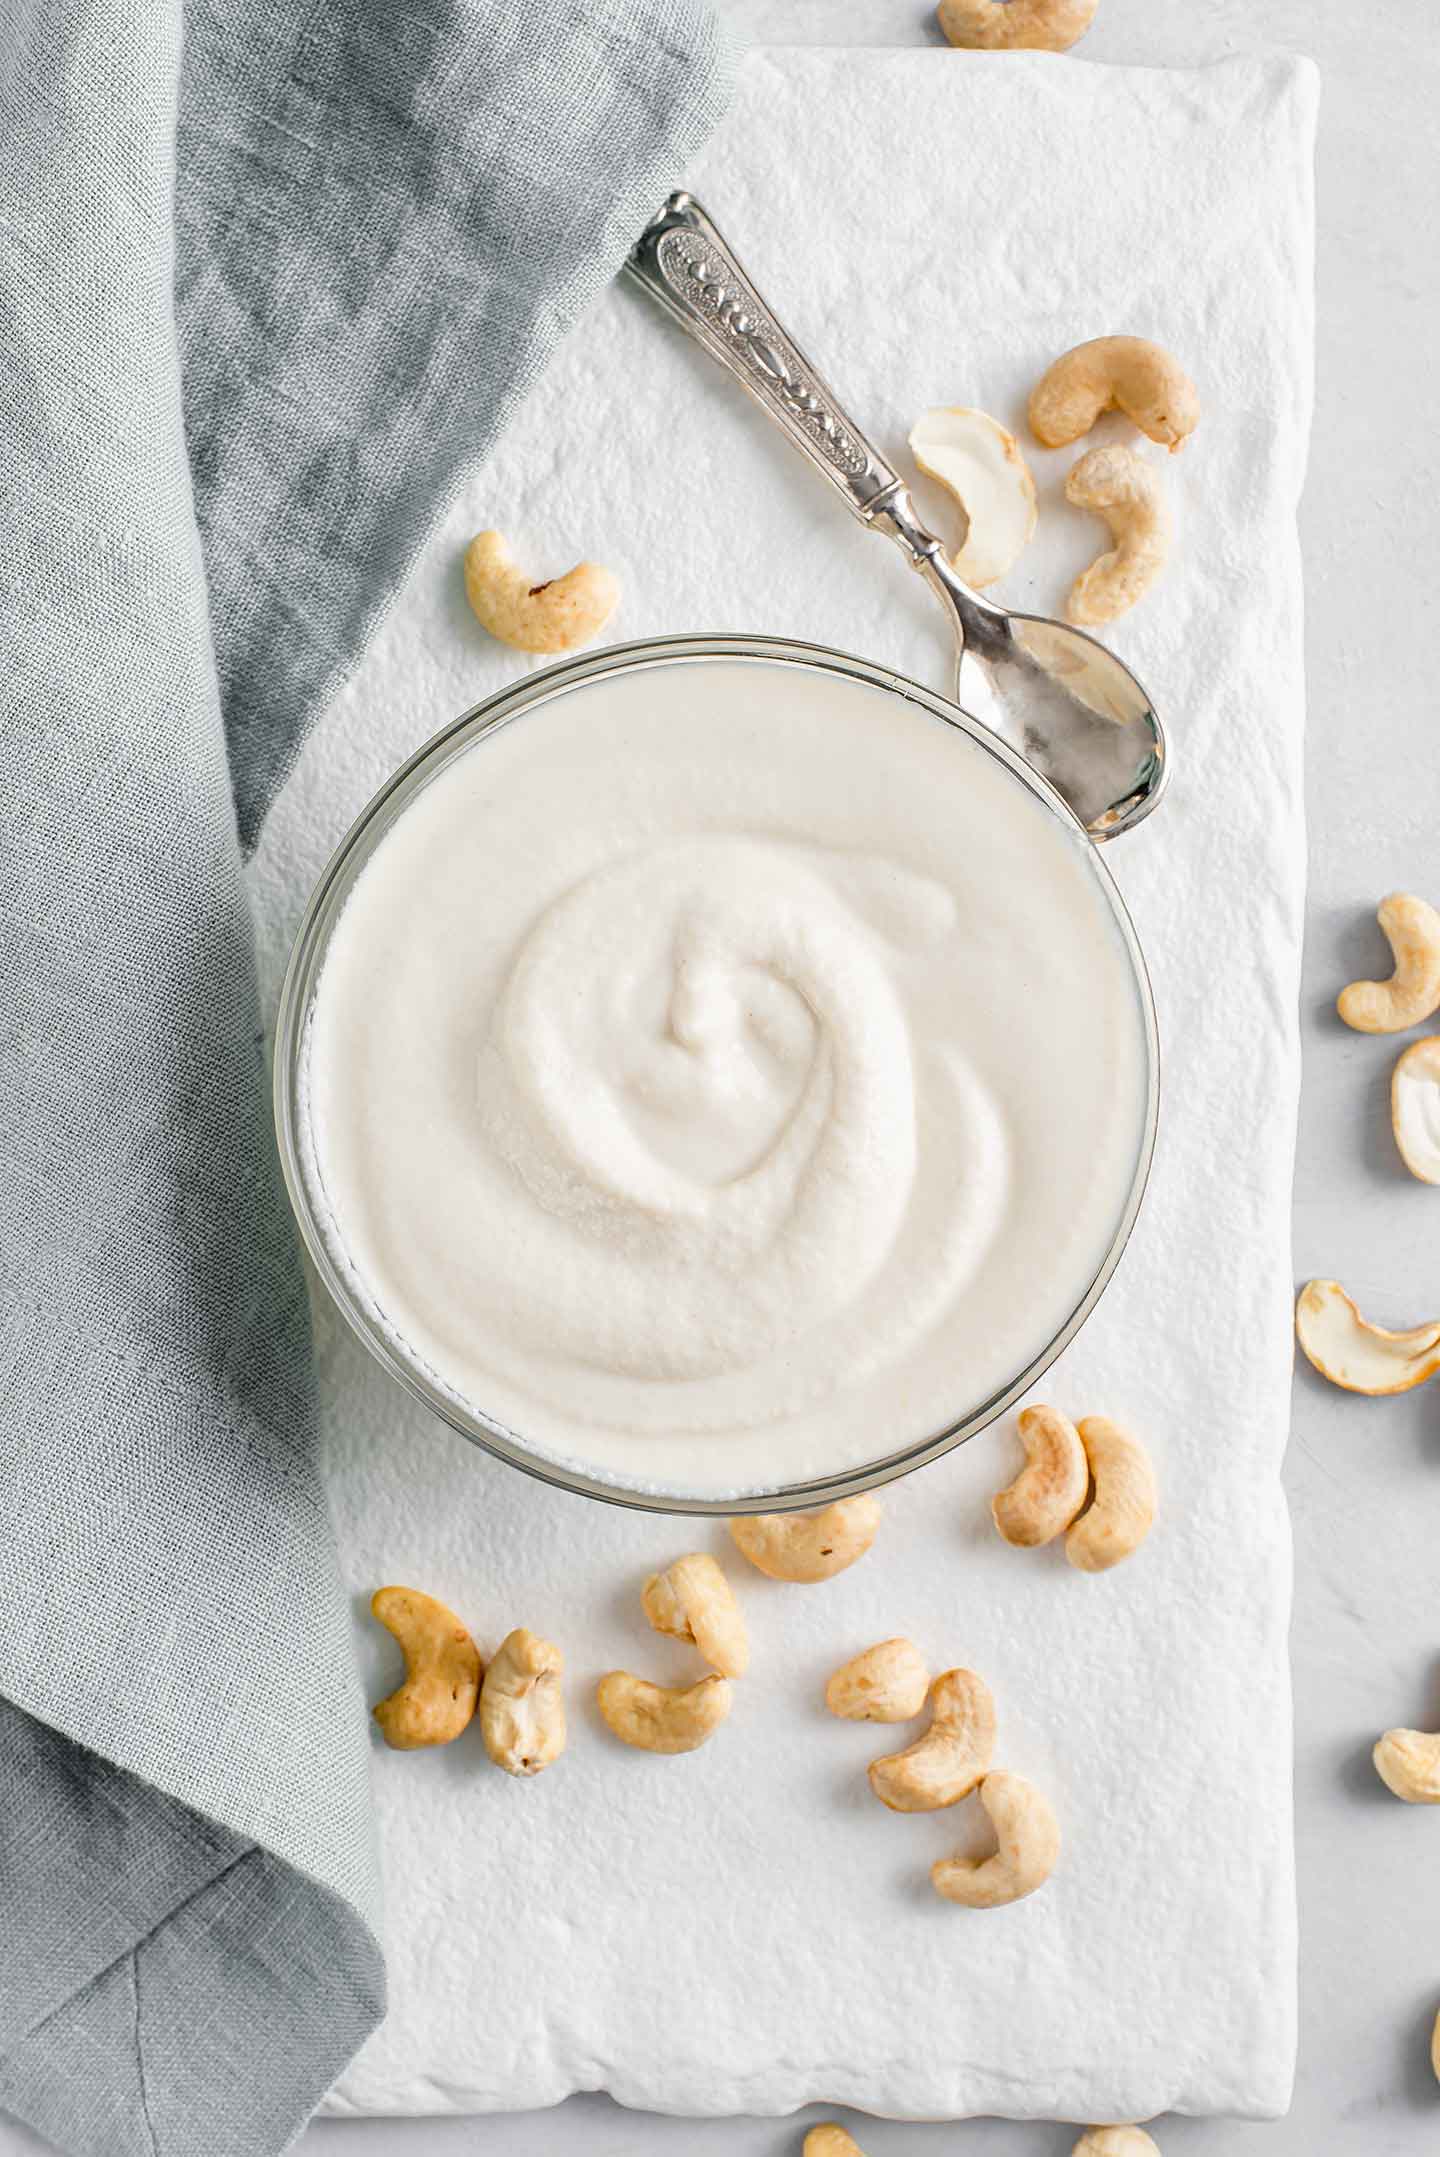 Top down view of 4 Ingredient sour cream in a small glass dish. The cream is thick with a swirl through it. Cashews are scattered on a white tray around the dish.